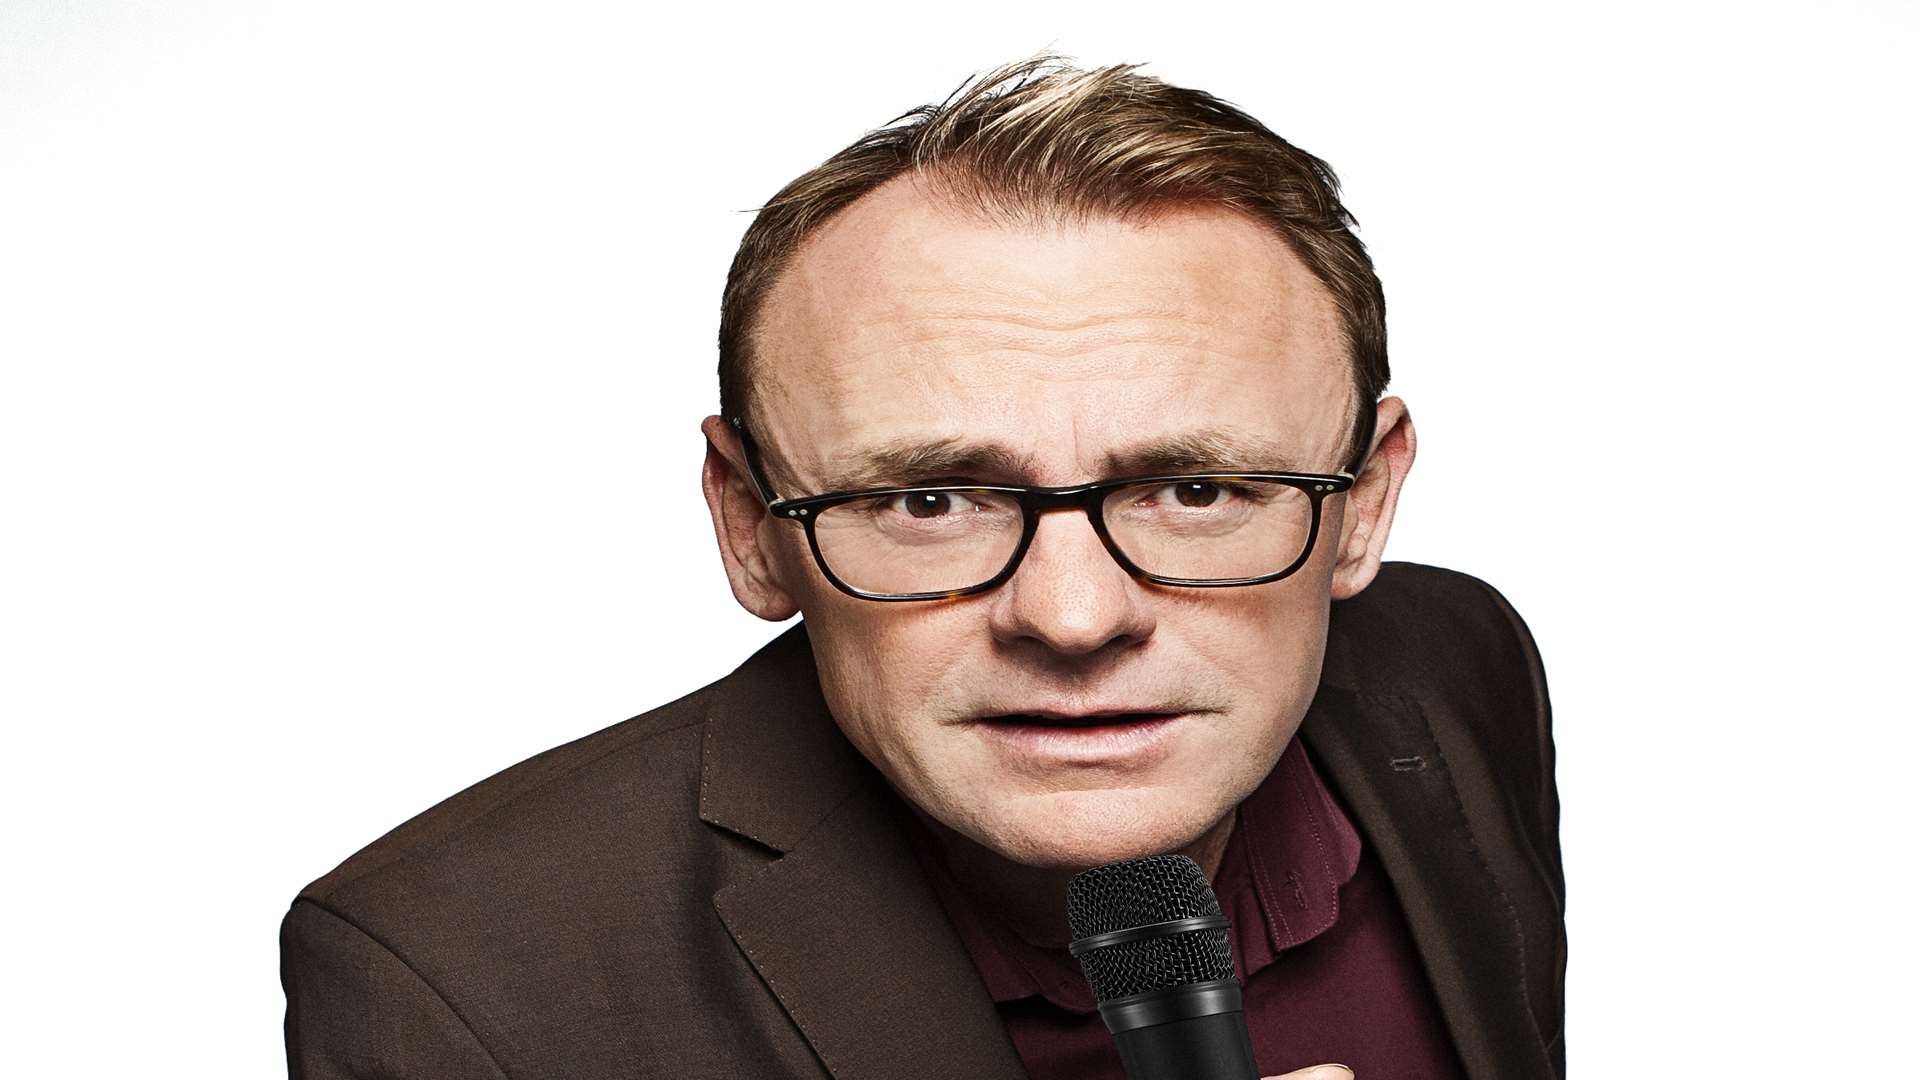 Sean Lock's show Keep It Light is coming to Margate